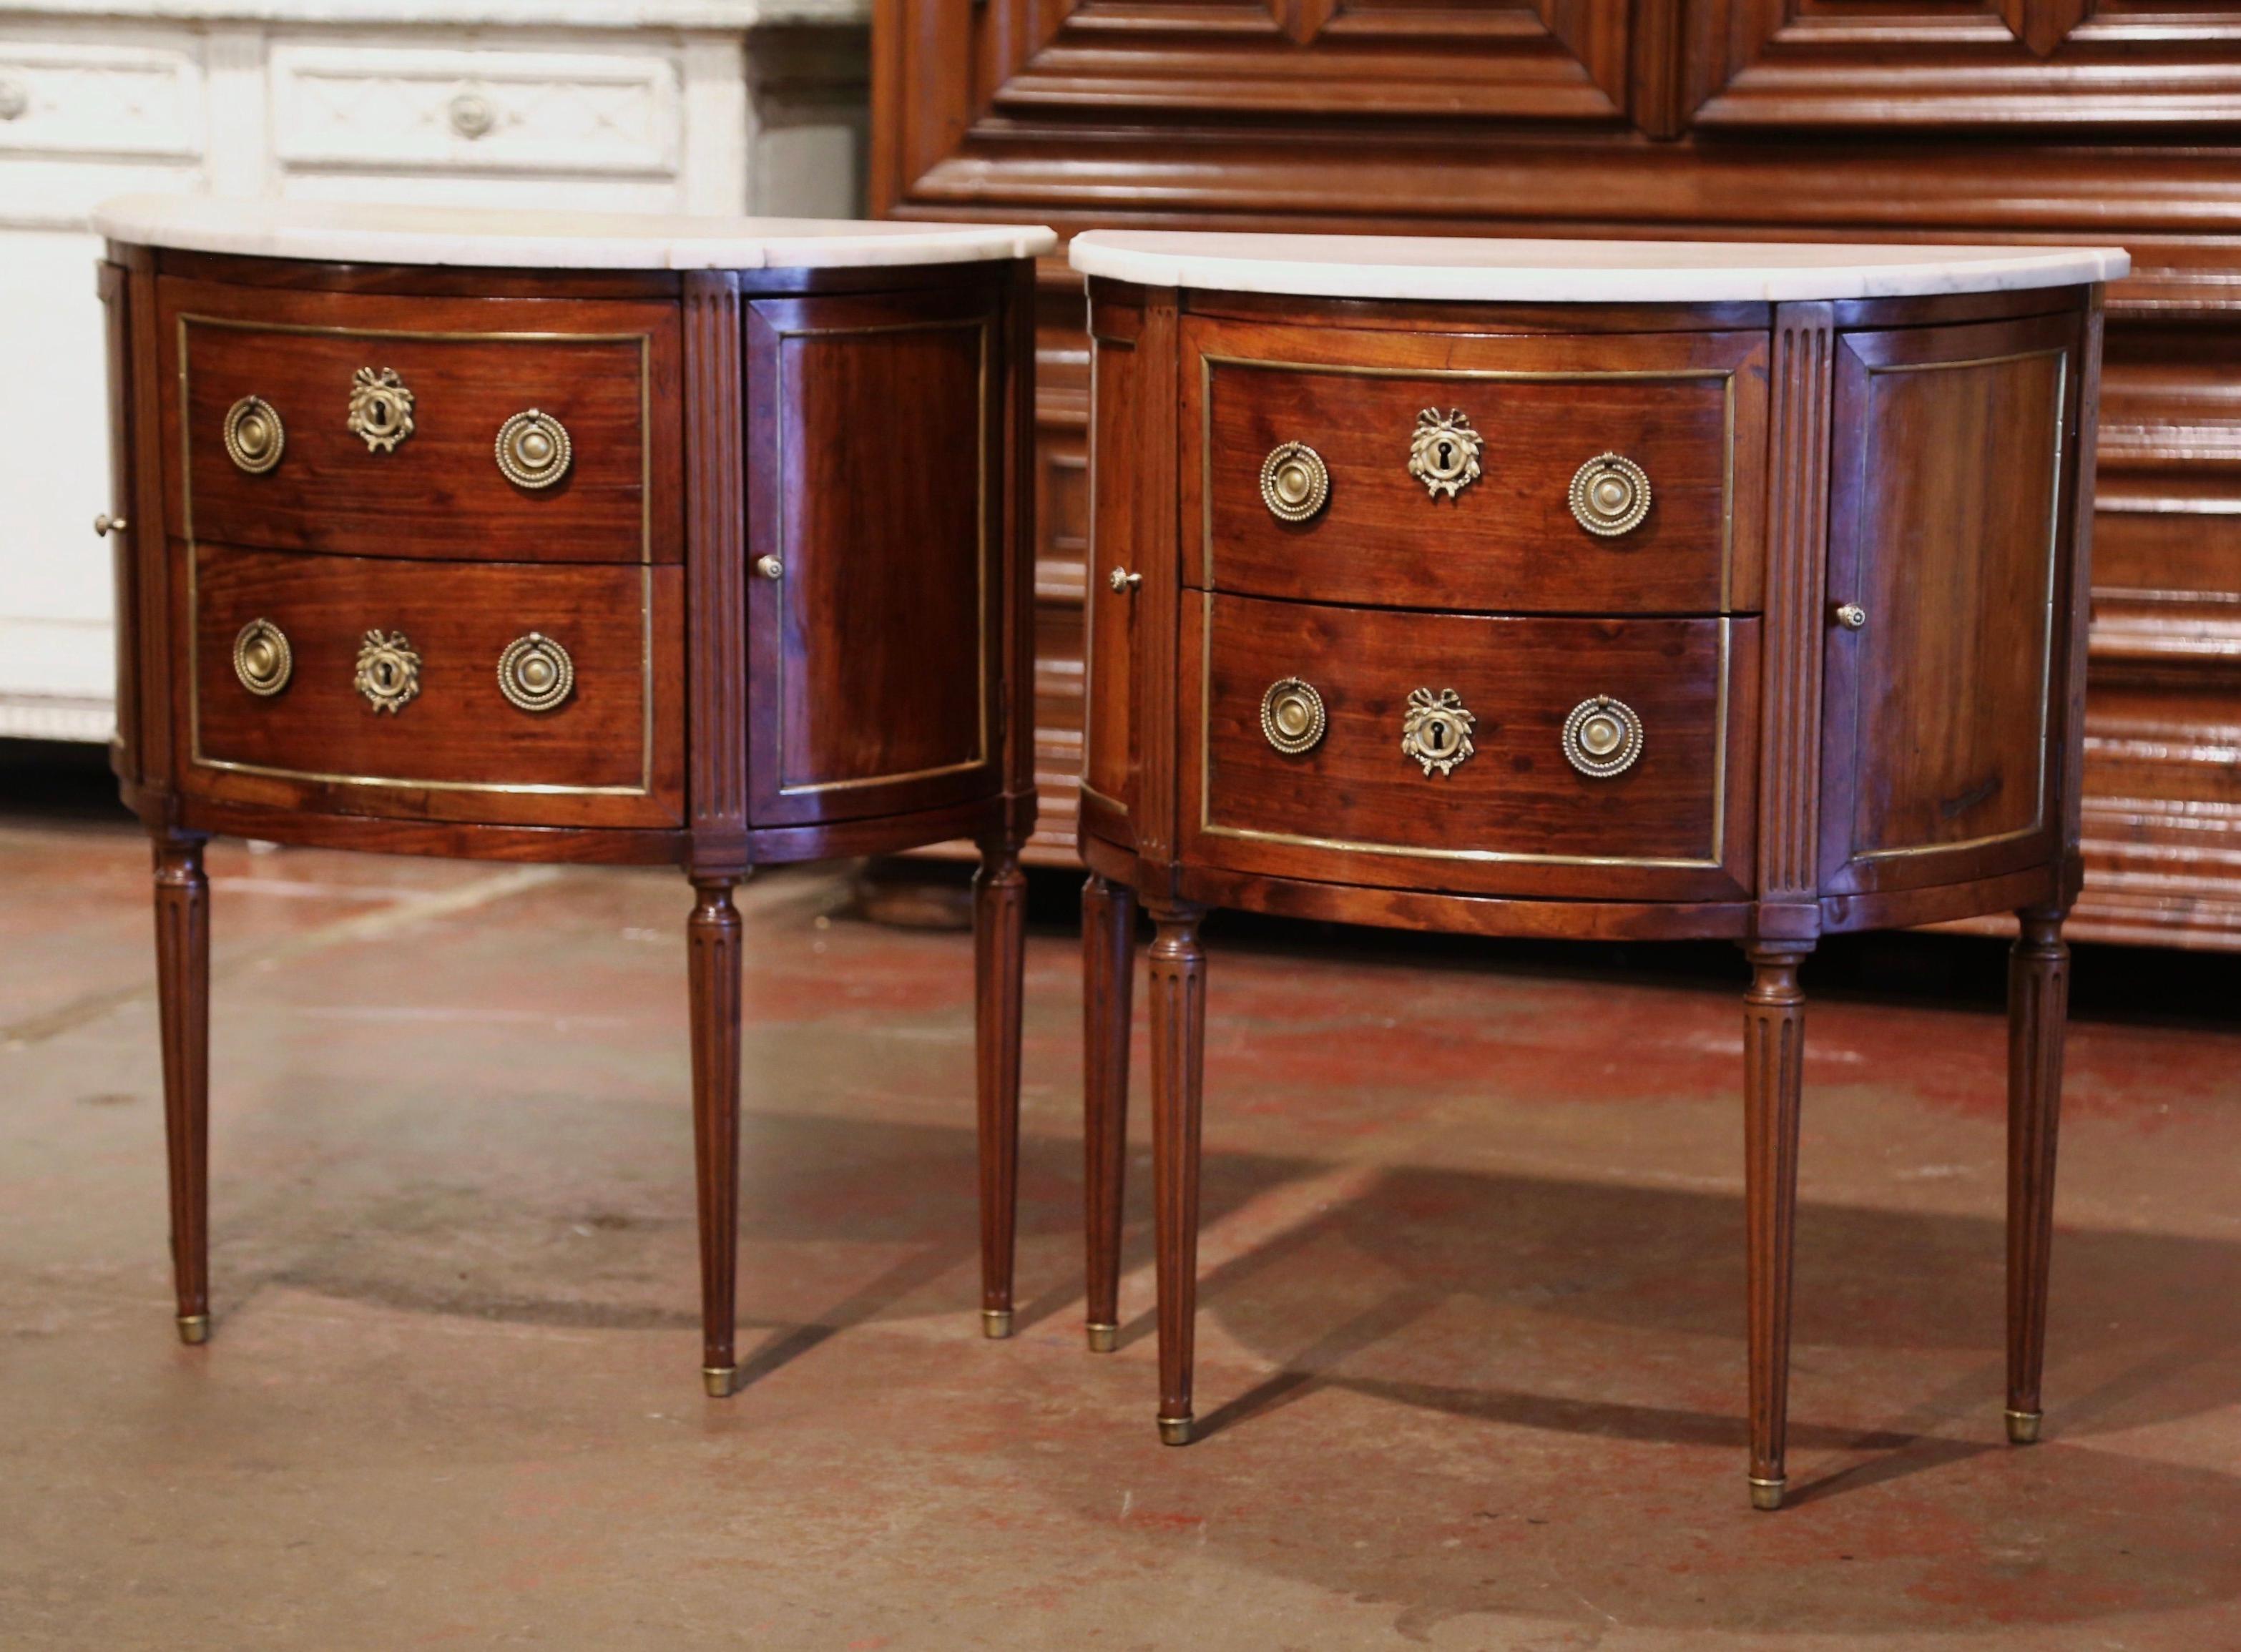 Place this elegant pair of chests on either side of a king side bed and use them as nightstands. Crafted in Paris, France circa 1860, each cabinet shaped a half moon stands on fluted legs ending with brass feet. The commode features two bowed